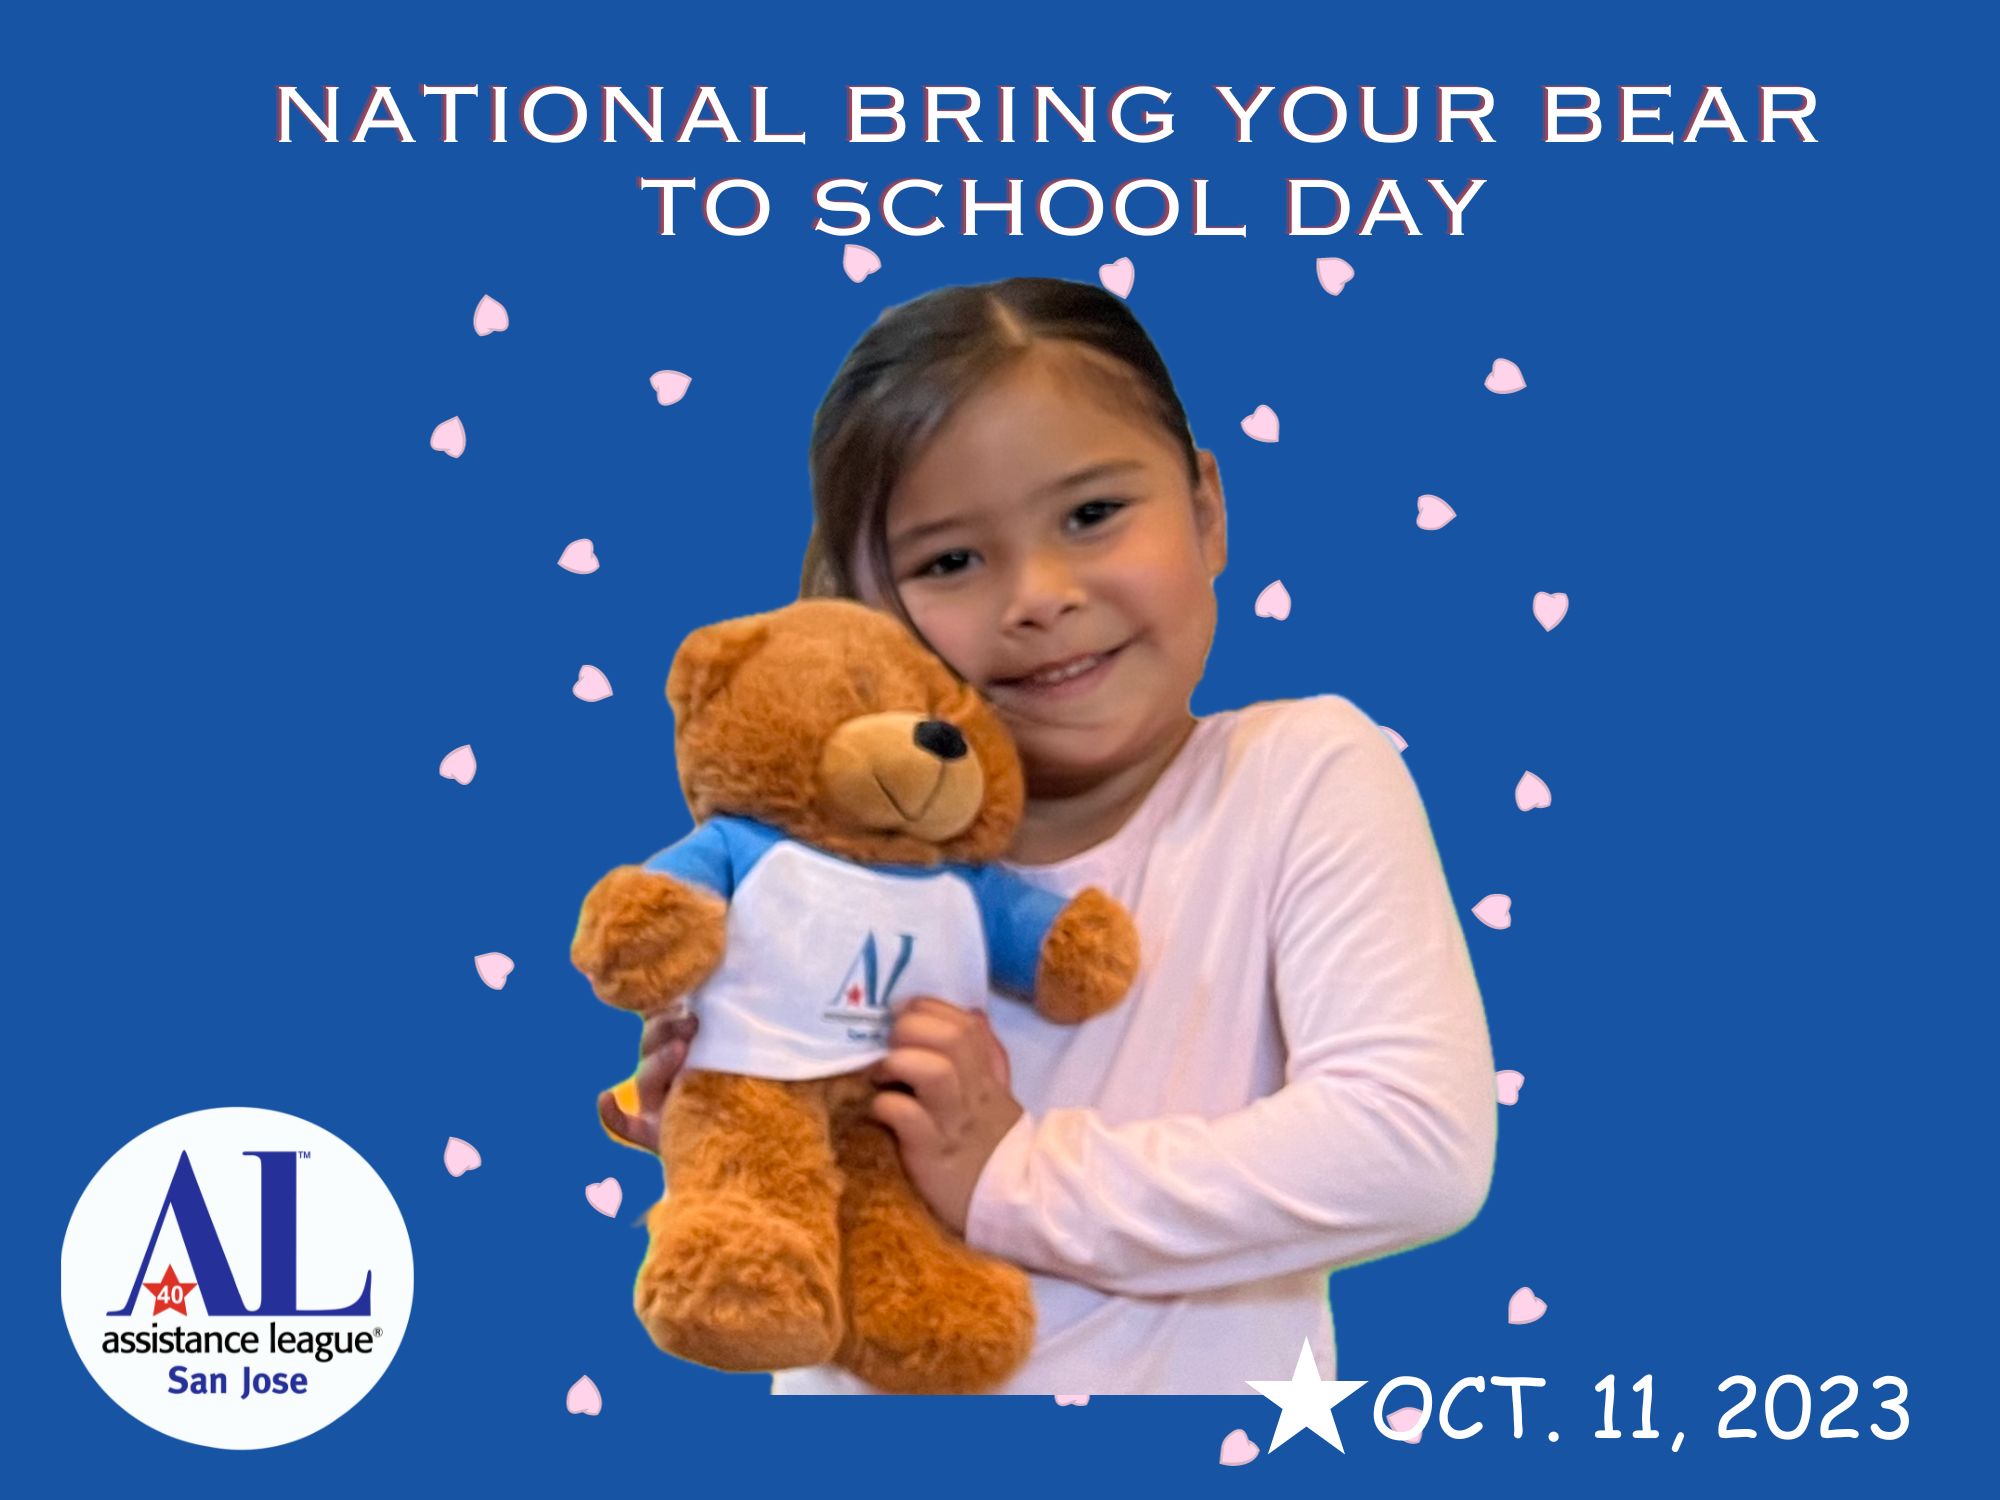 National Bring Your Bear to School Day